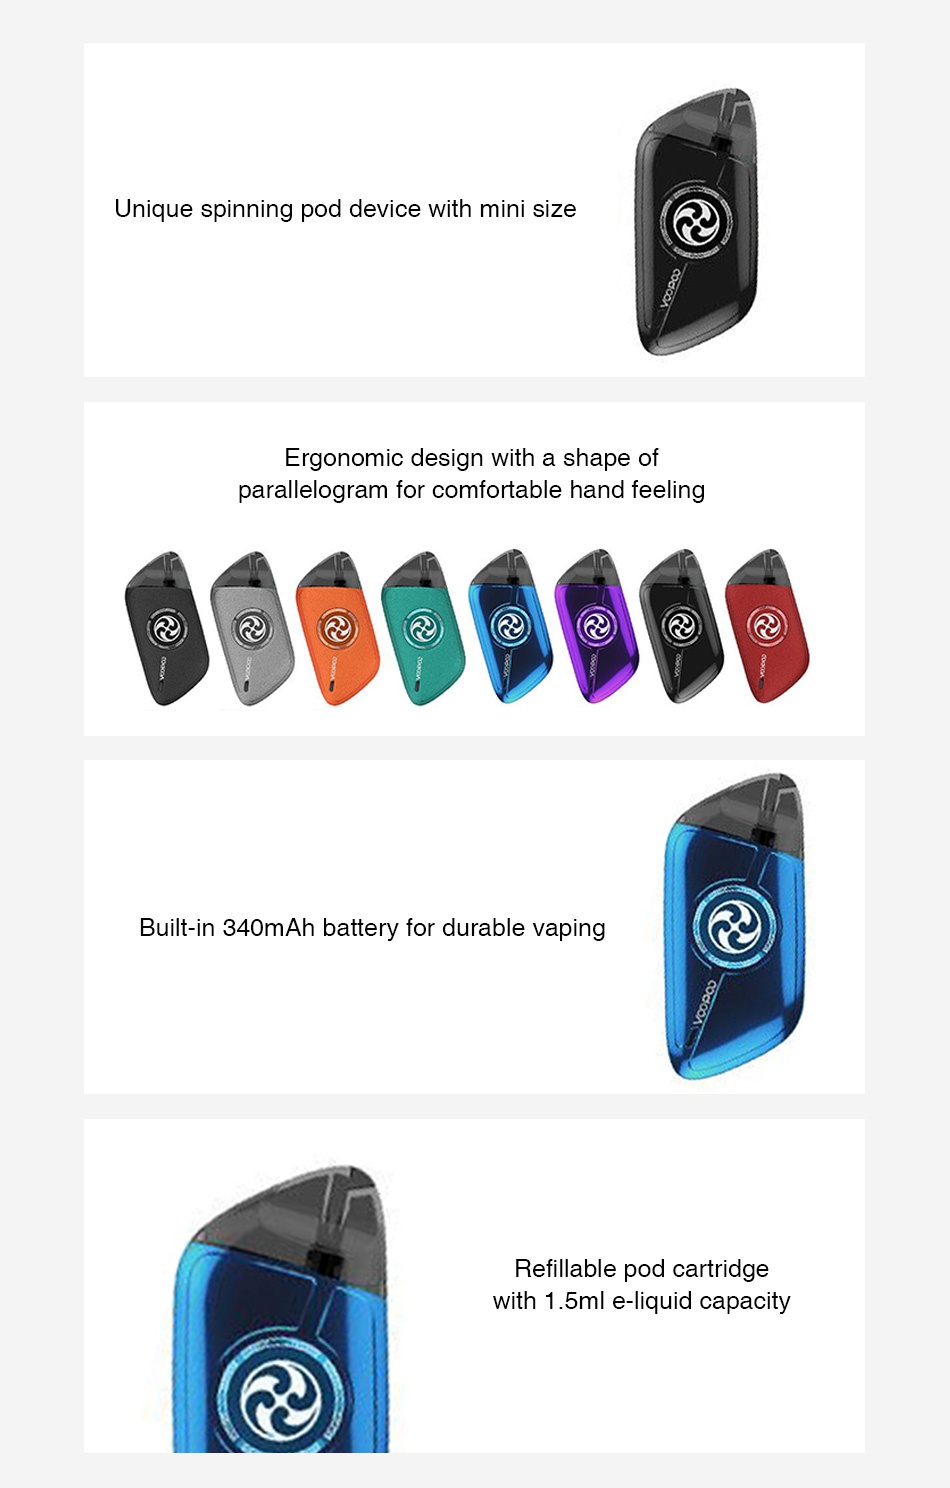 VOOPOO Rota Spinning Pod Starter Kit 340mAh Unique spinning pod device with mini size rgonomic design with a shape of parallelogram for comfortable hand feeling   Built in 340mAh battery for durable vaping   Refillable pod cartridge With 1 5ml e liquid capacit